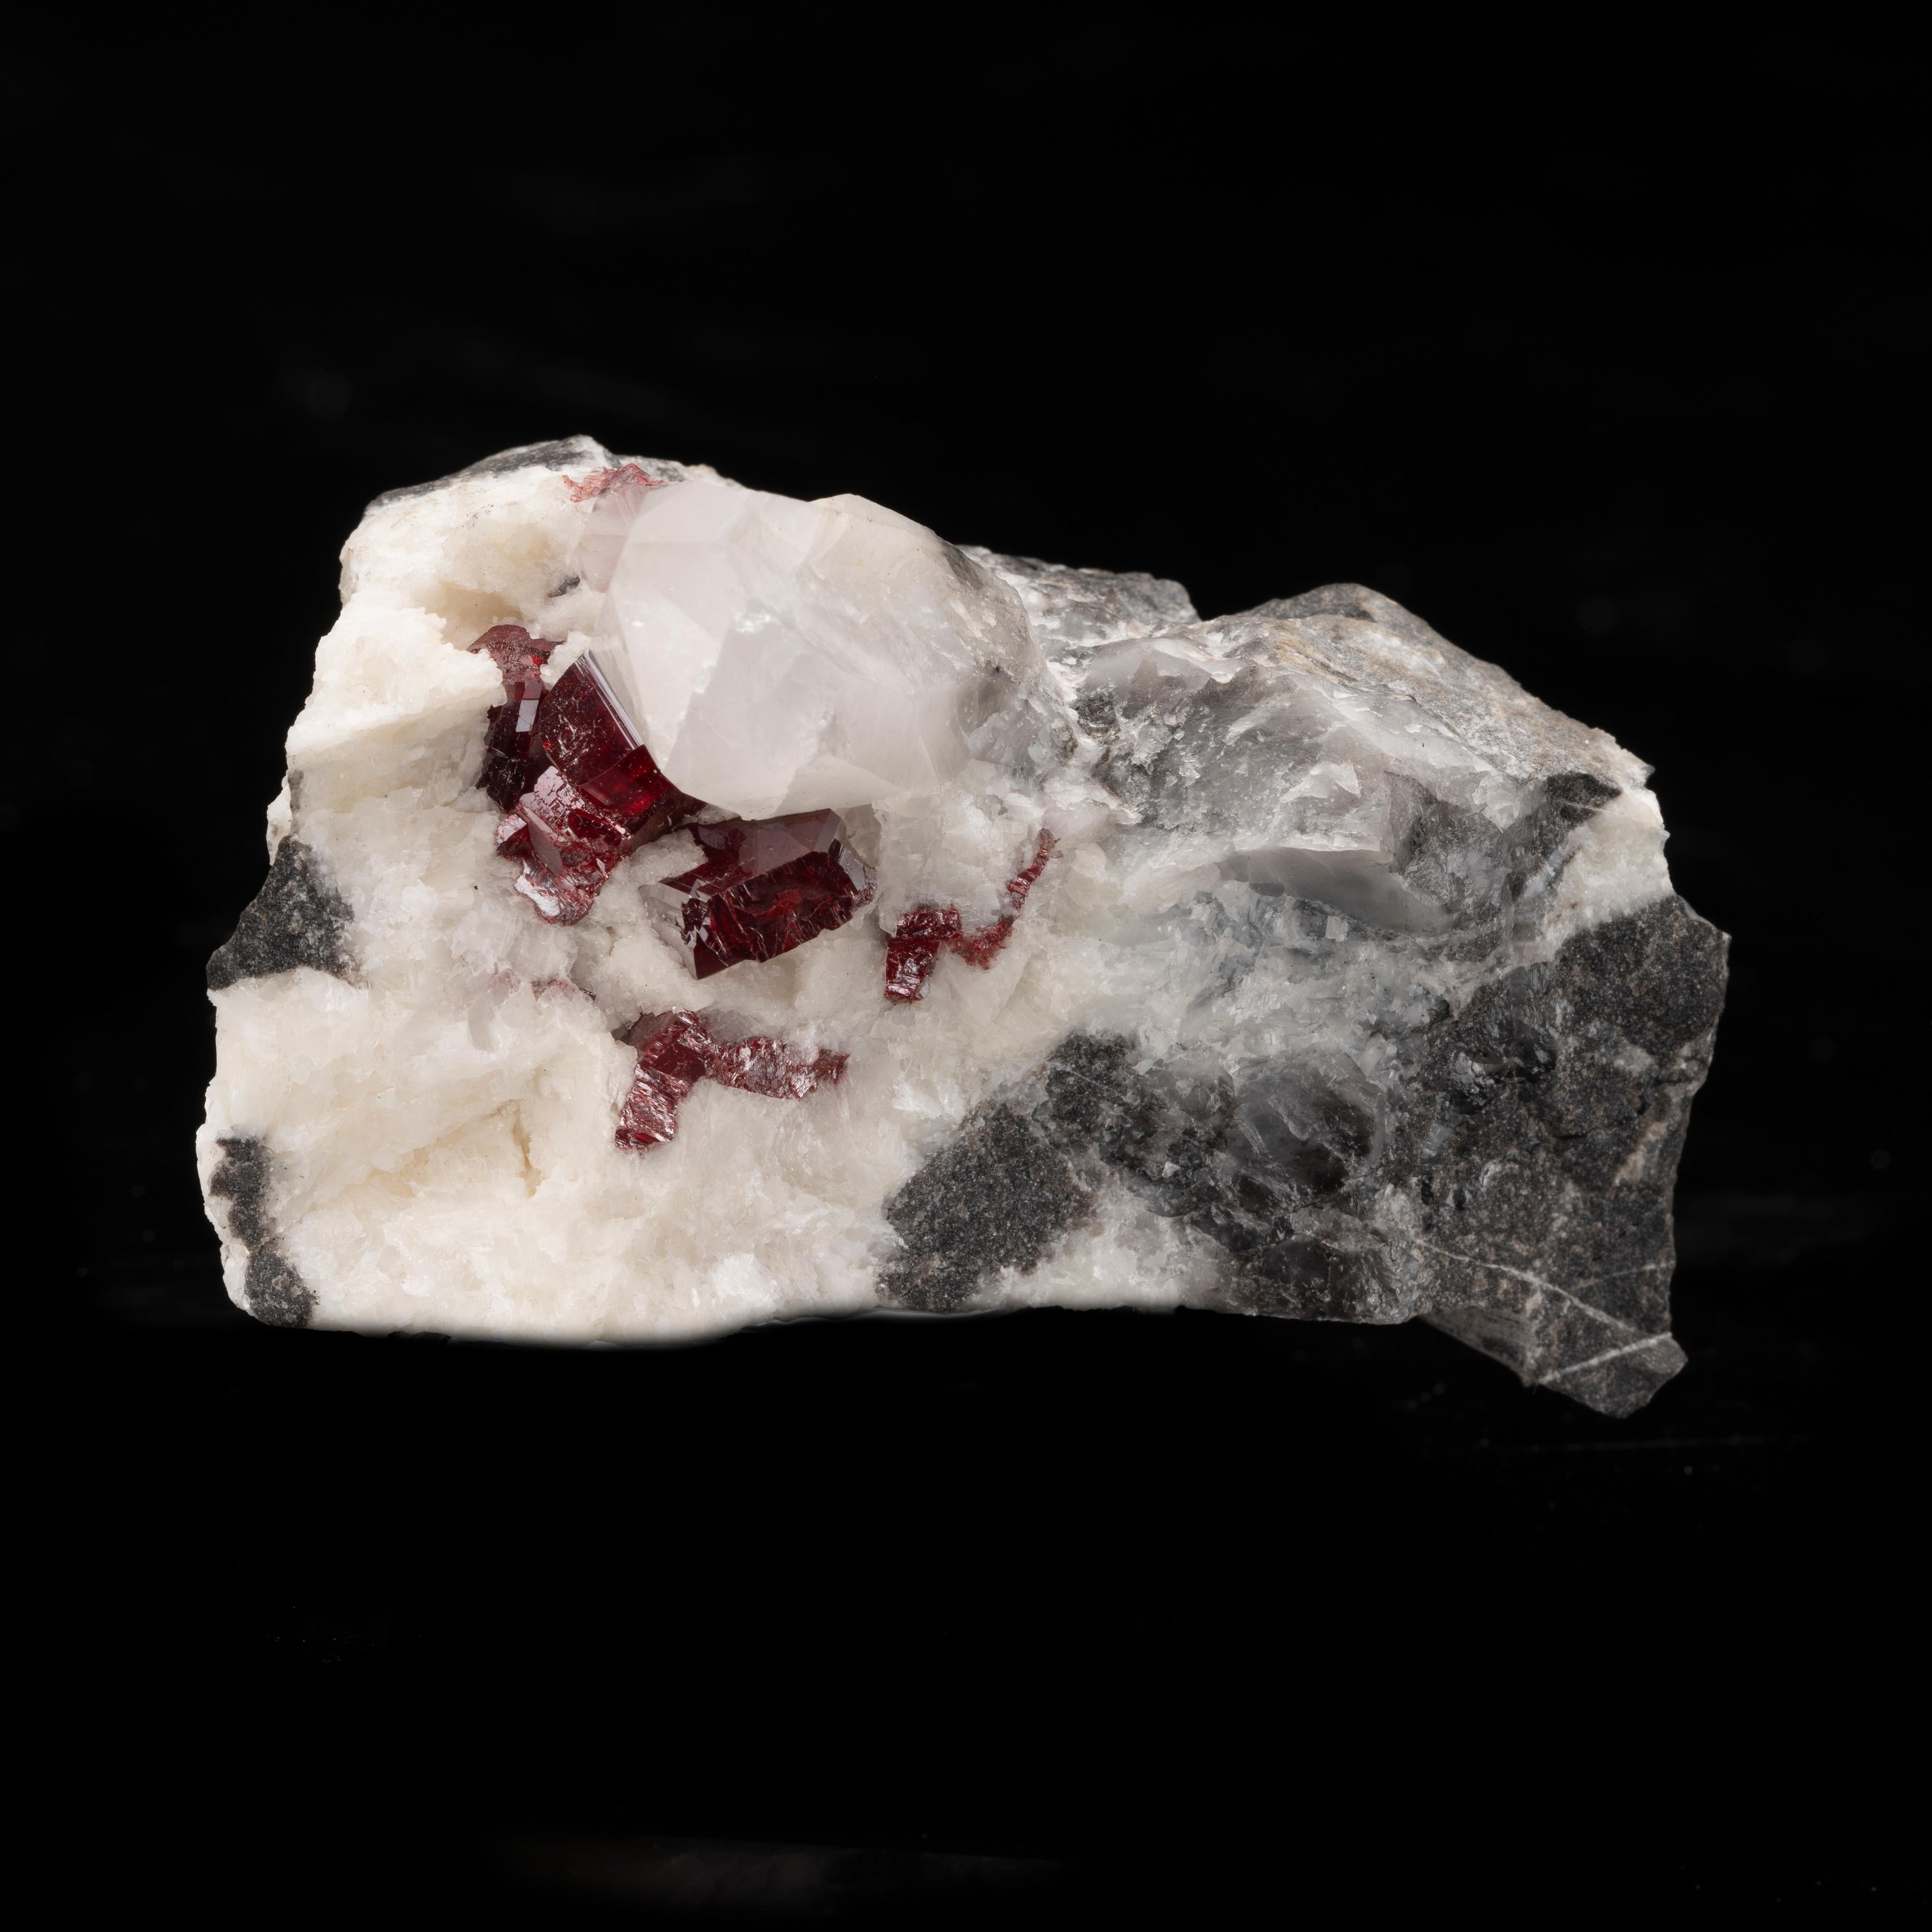 The lush red crystals juxtaposed in a snowy white and gray matrix are cinnabar, a mercury-rich ore historically found in China where this highly collectible specimen was sourced. Cinnabar was often used in ancient China as a pigment and in